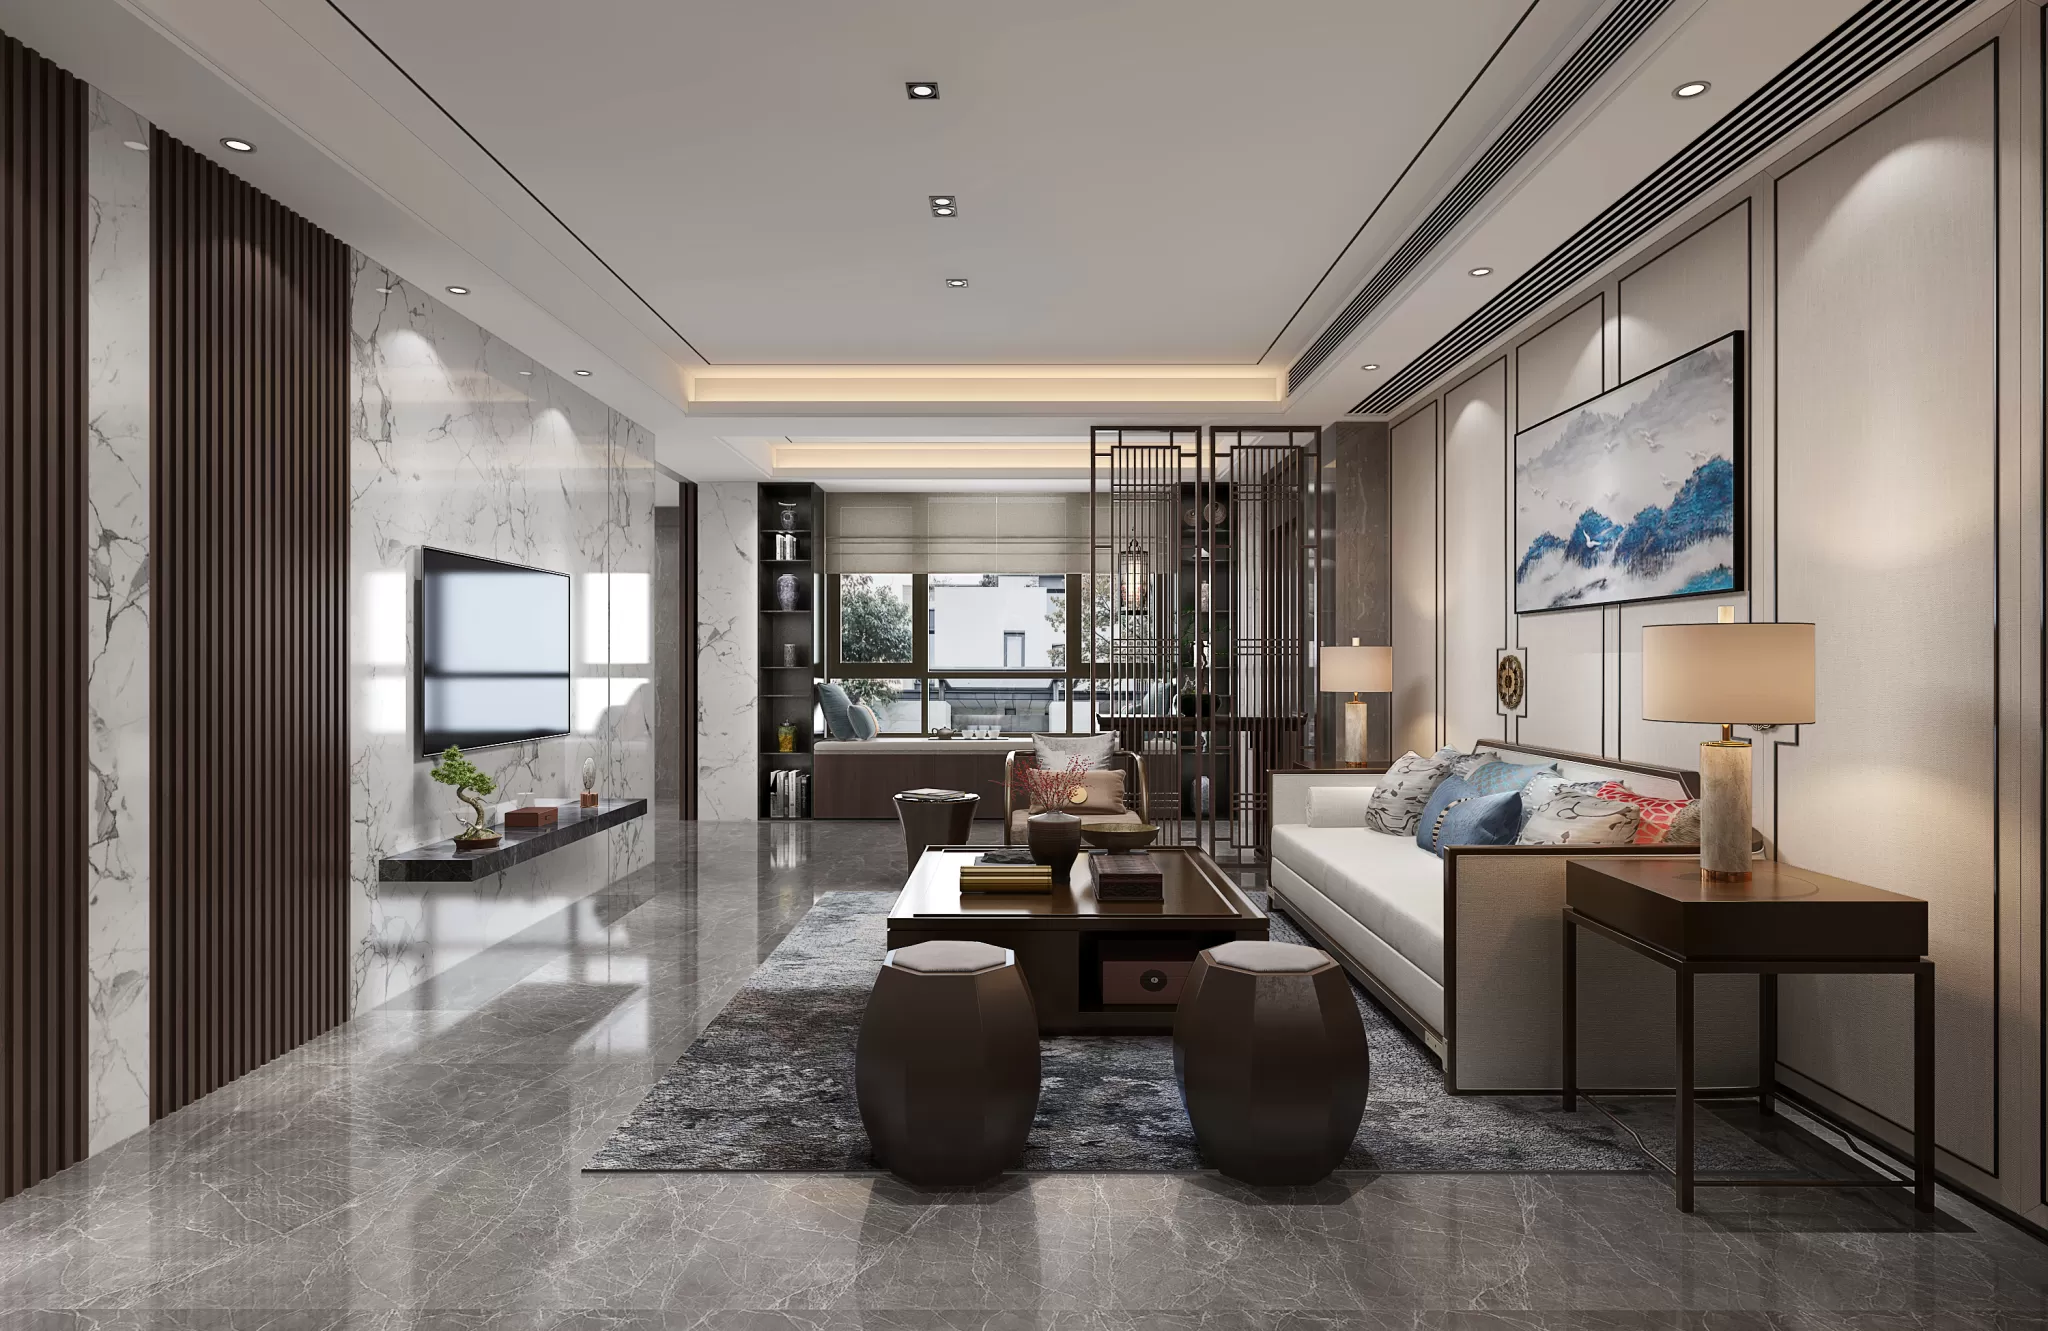 DESMOD INTERIOR 2021 (VRAY) – 4. LIVING ROOM – CHINESE – 020